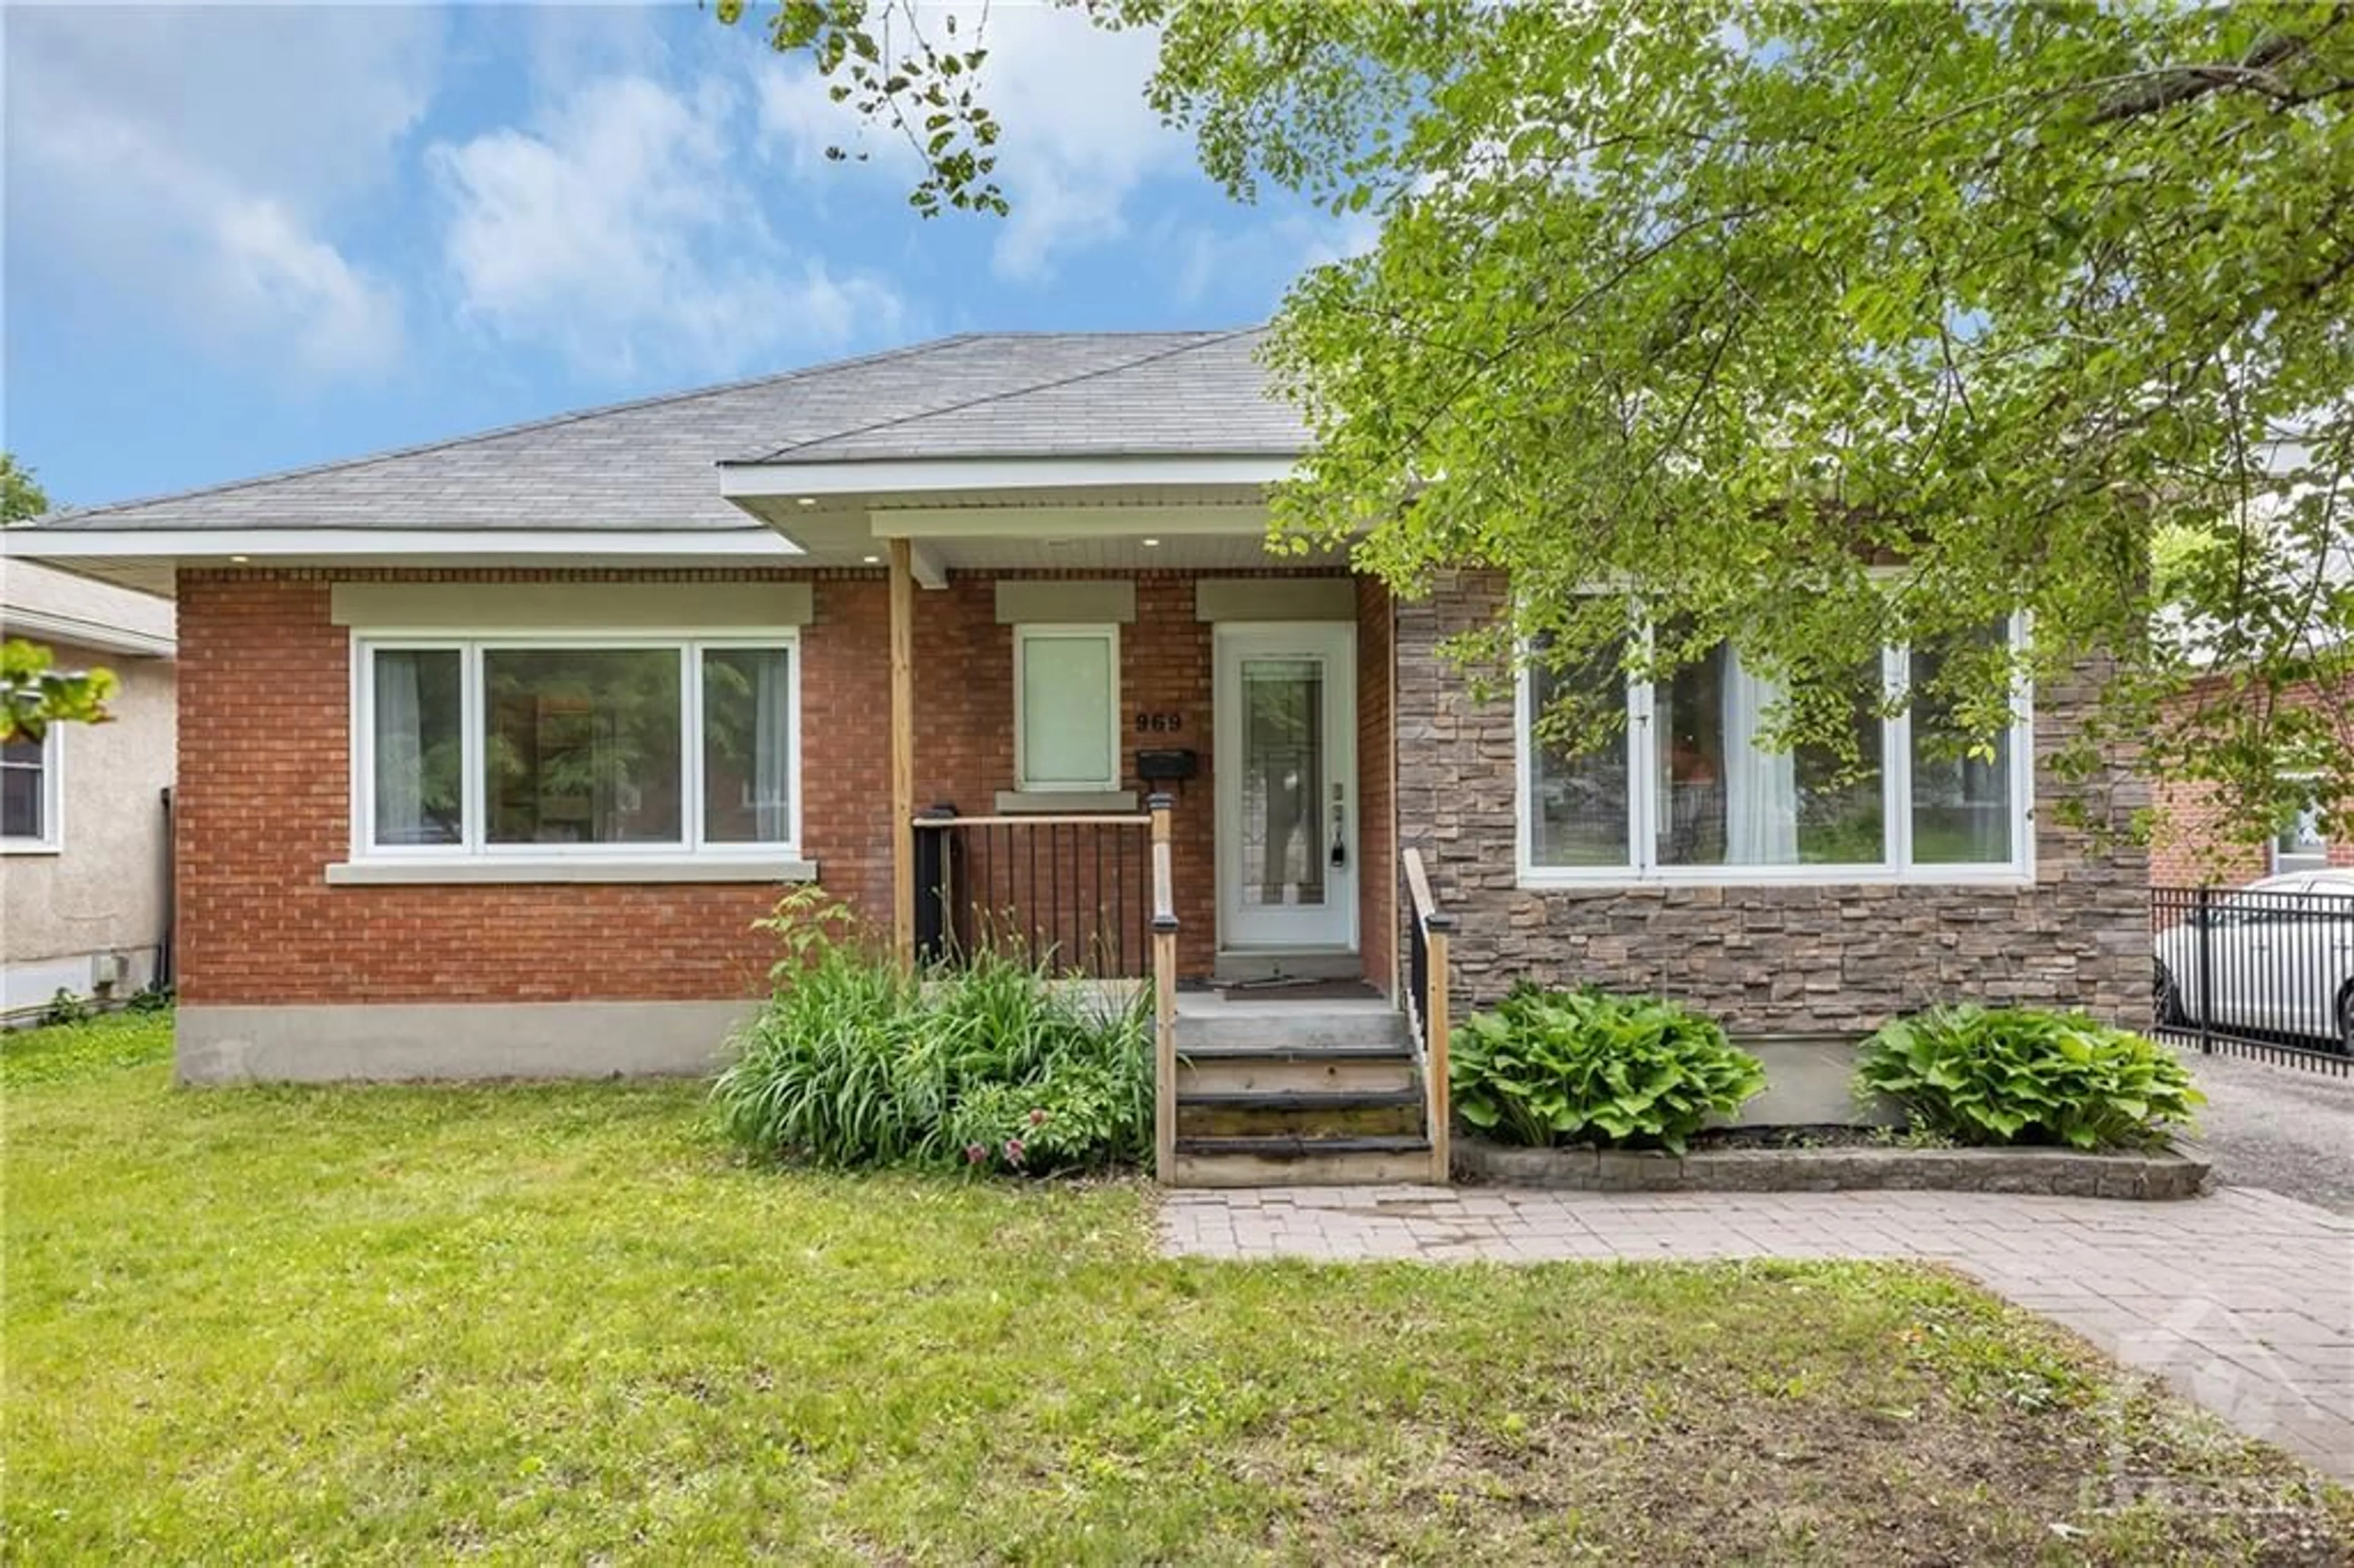 Home with brick exterior material for 969 BEAUDRY St, Ottawa Ontario K1K 3R9